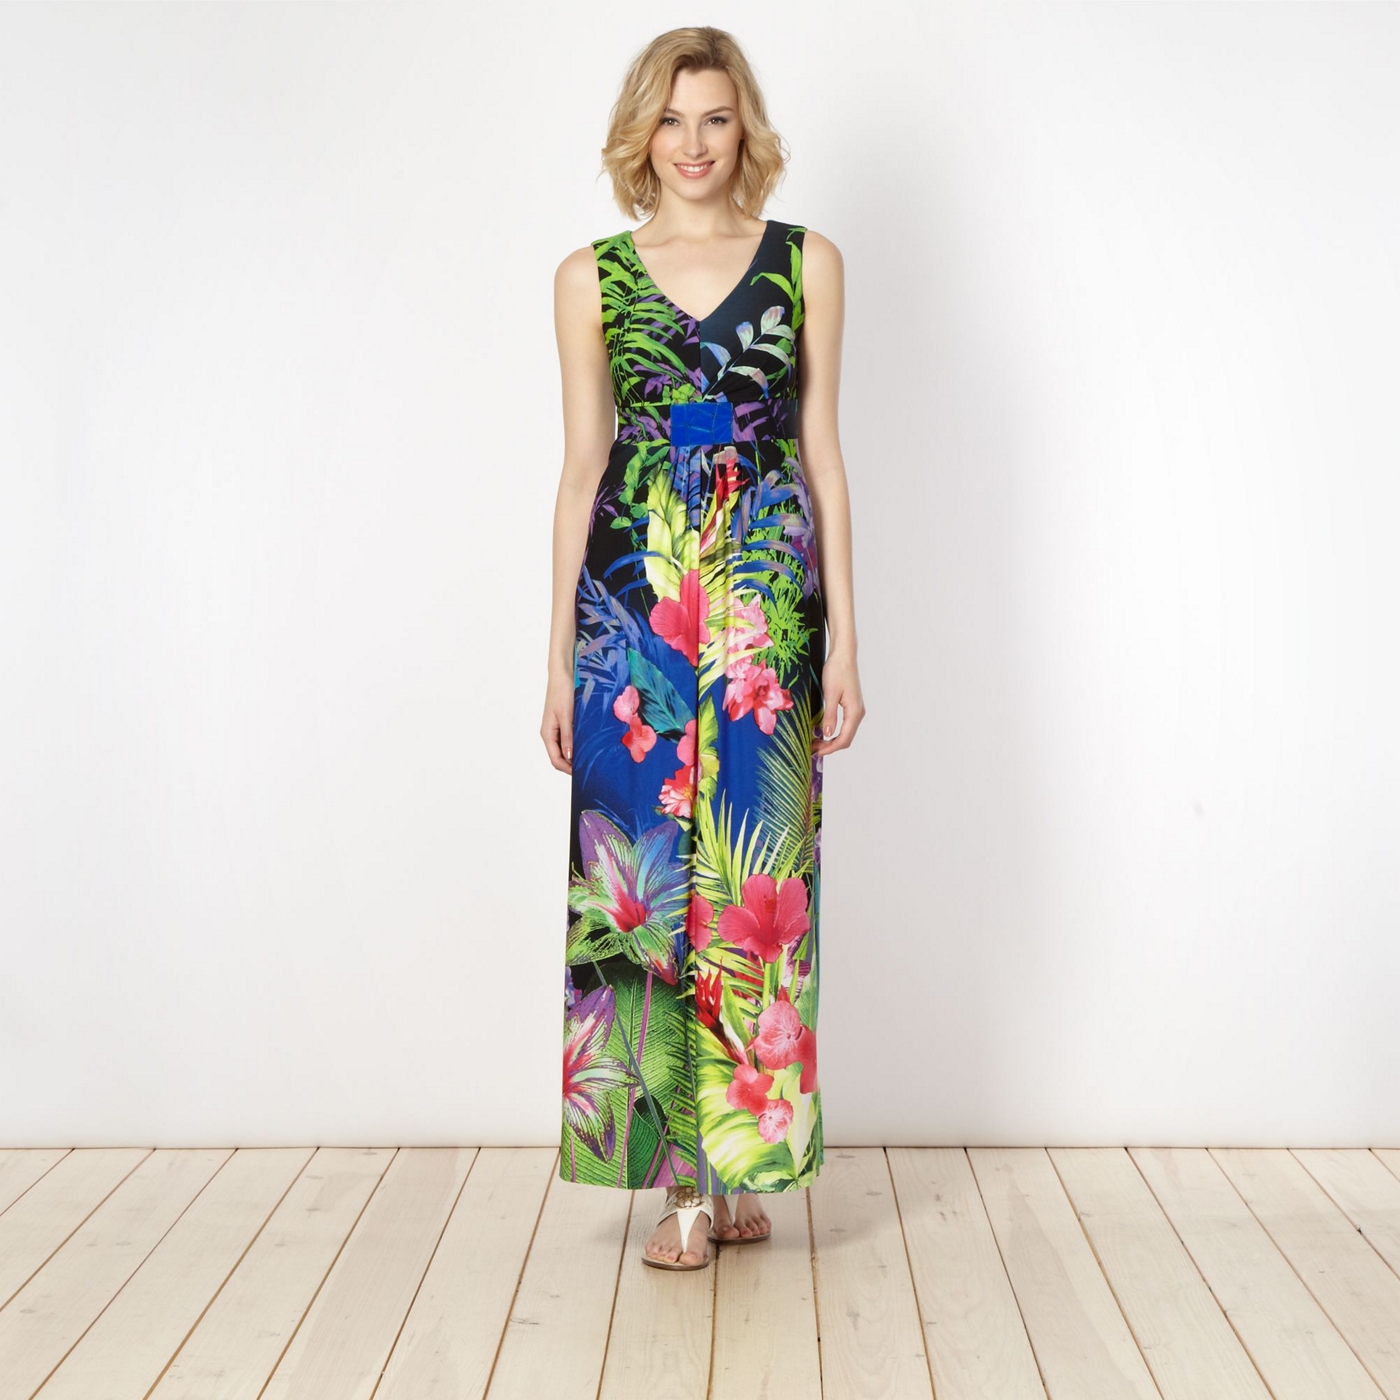 The Collection Bright blue floral jersey maxi dress